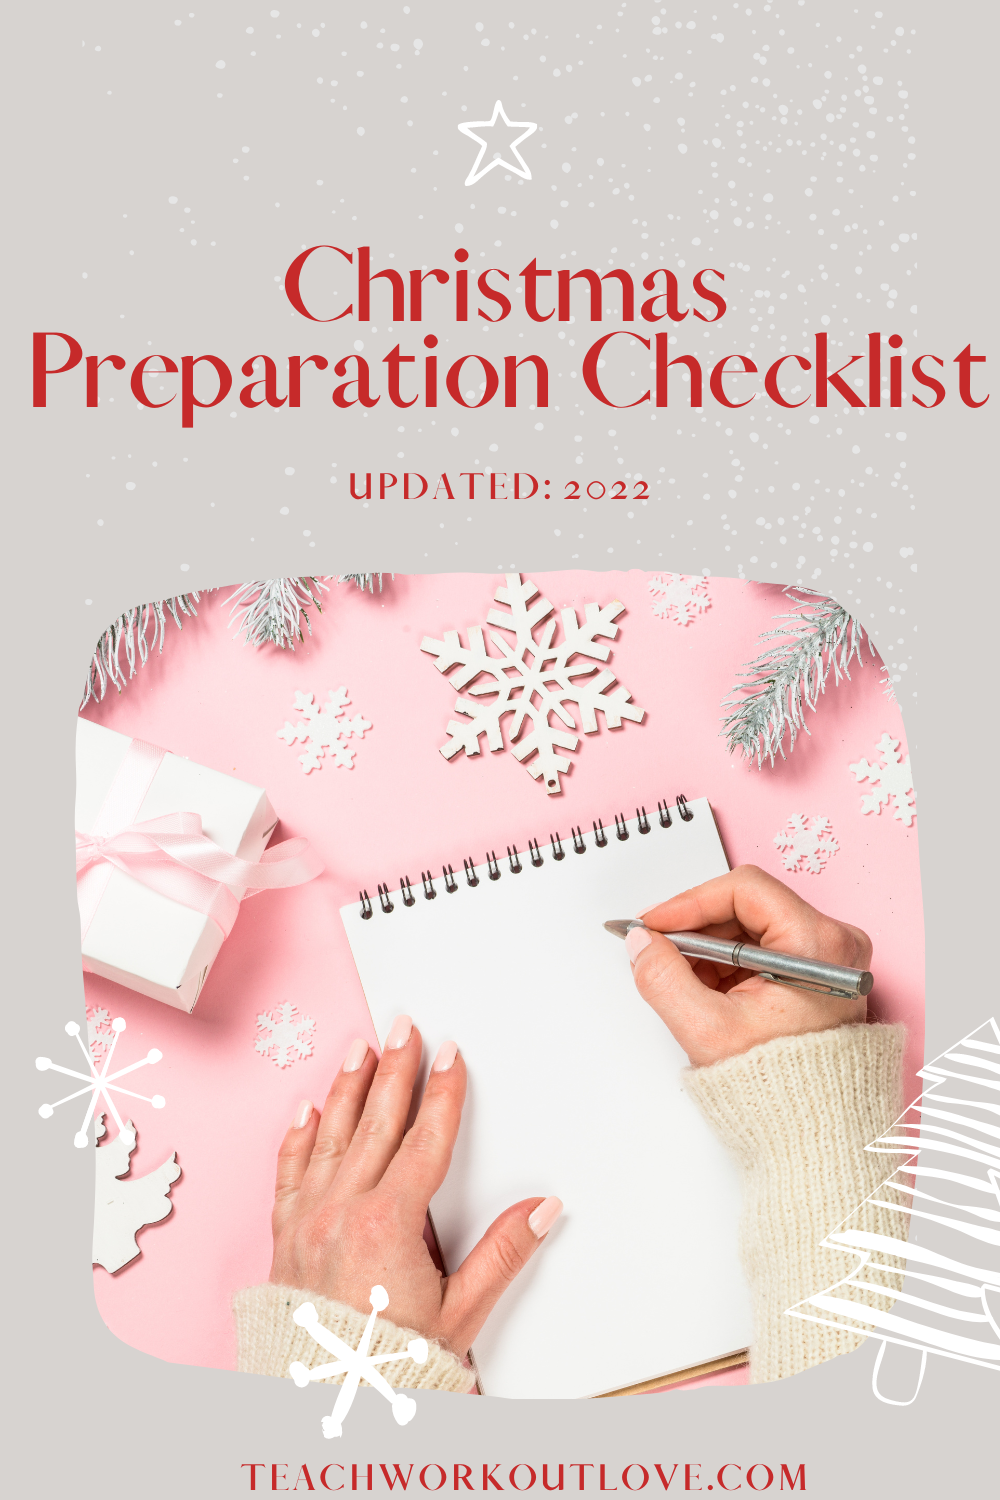 Christmas is coming real soon! But don't worry, we're here to help. Here are a few tips to help you make this Christmas the best one yet.